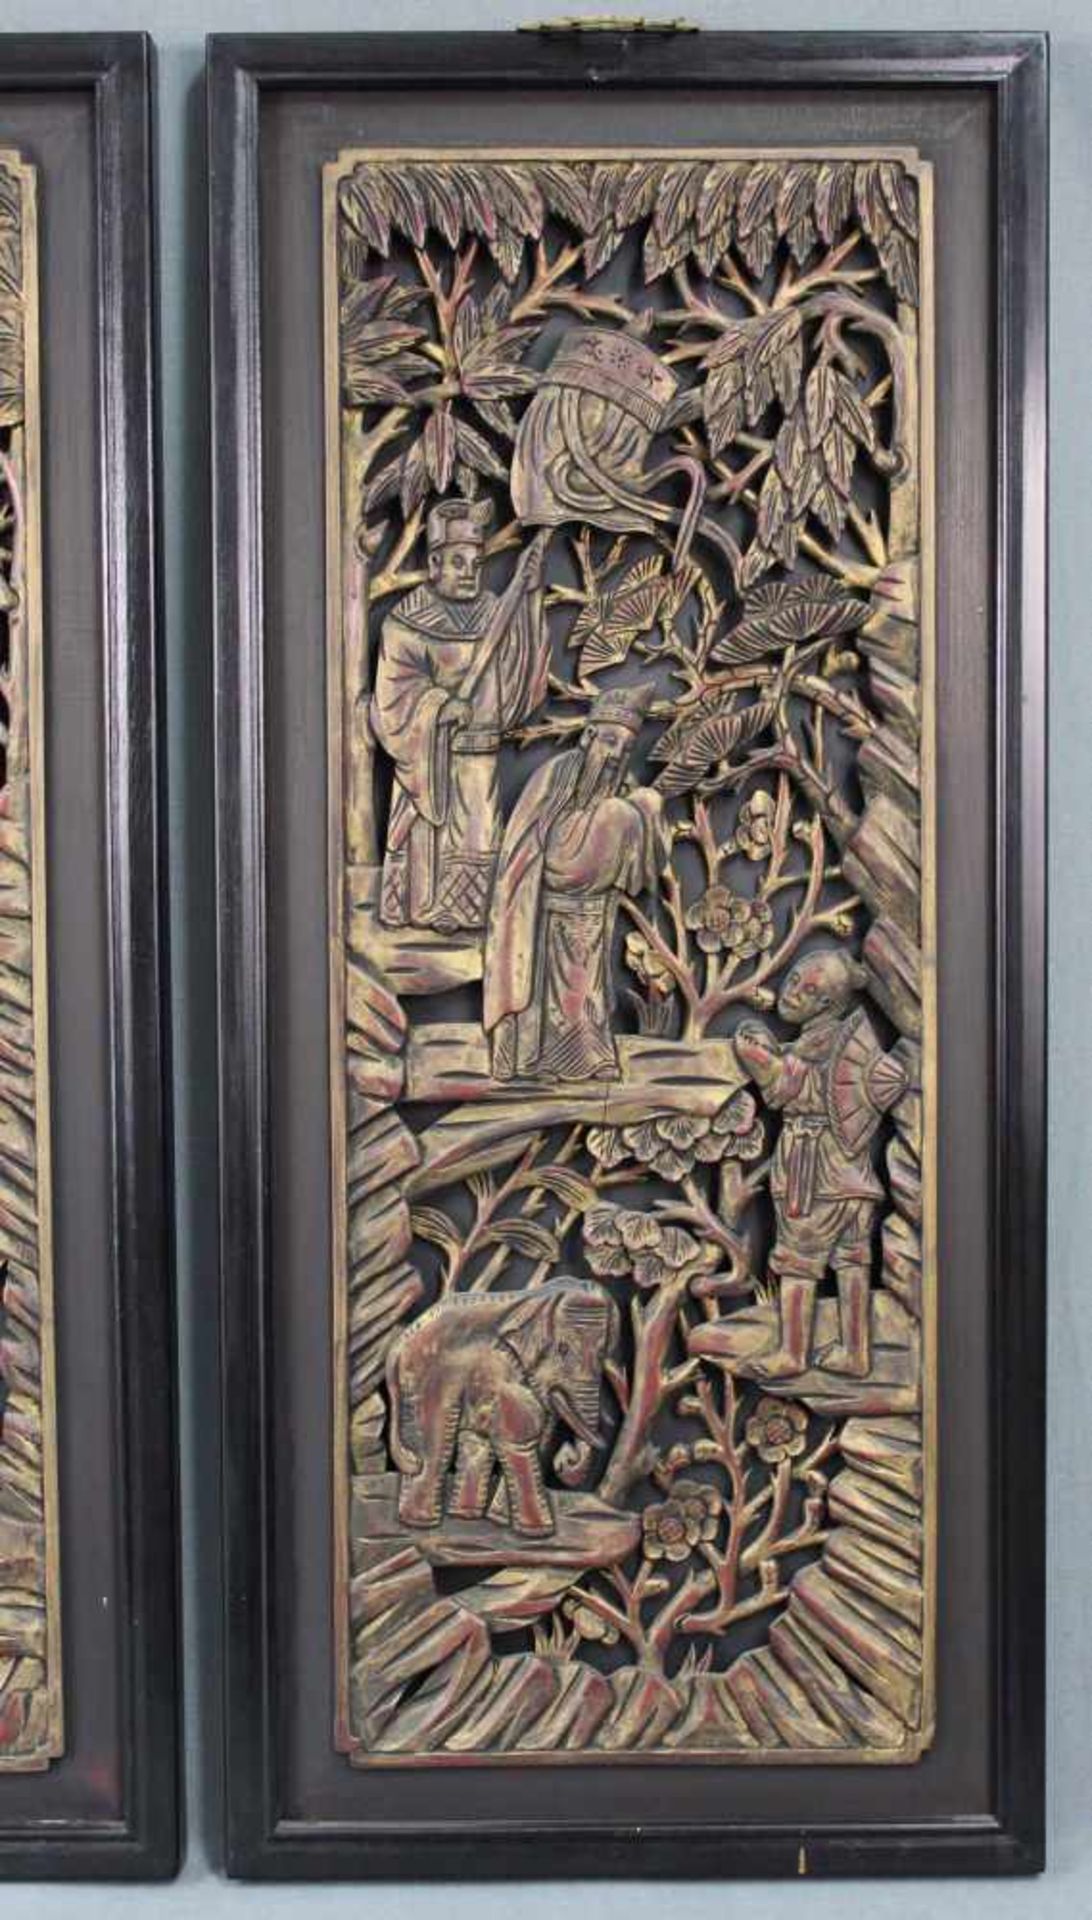 2 Paneele Holz geschnitzt. Wohl China alt. Je 77 cm x 34 cm. 2 panels carved wood. Probably China - Image 4 of 7